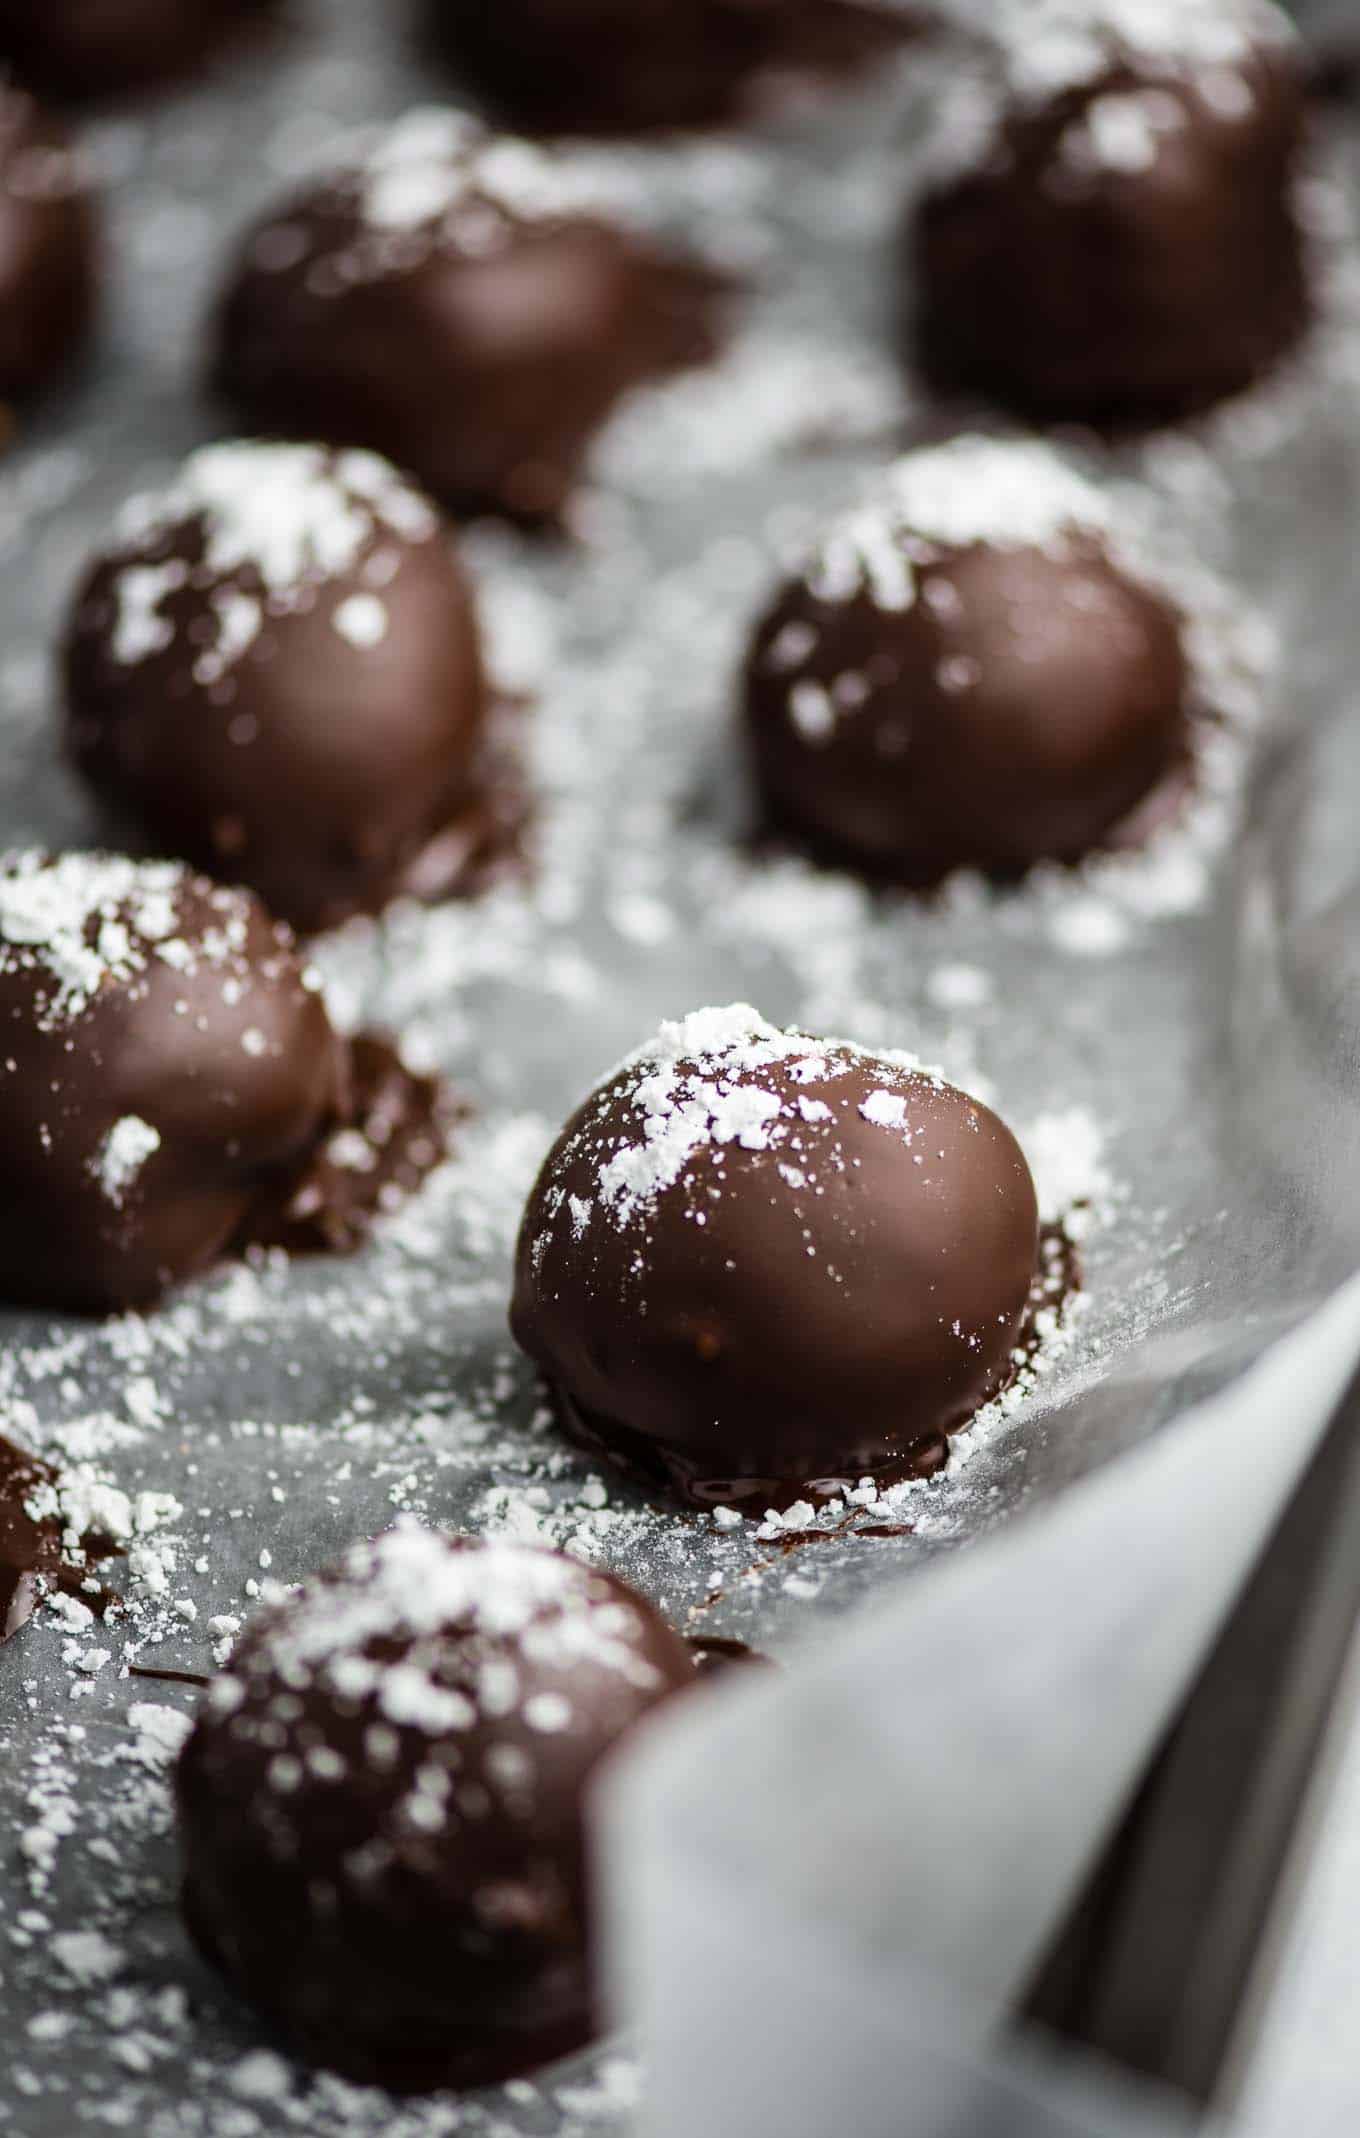 truffles lined up on the baking sheet sprinkled with powdered sugar